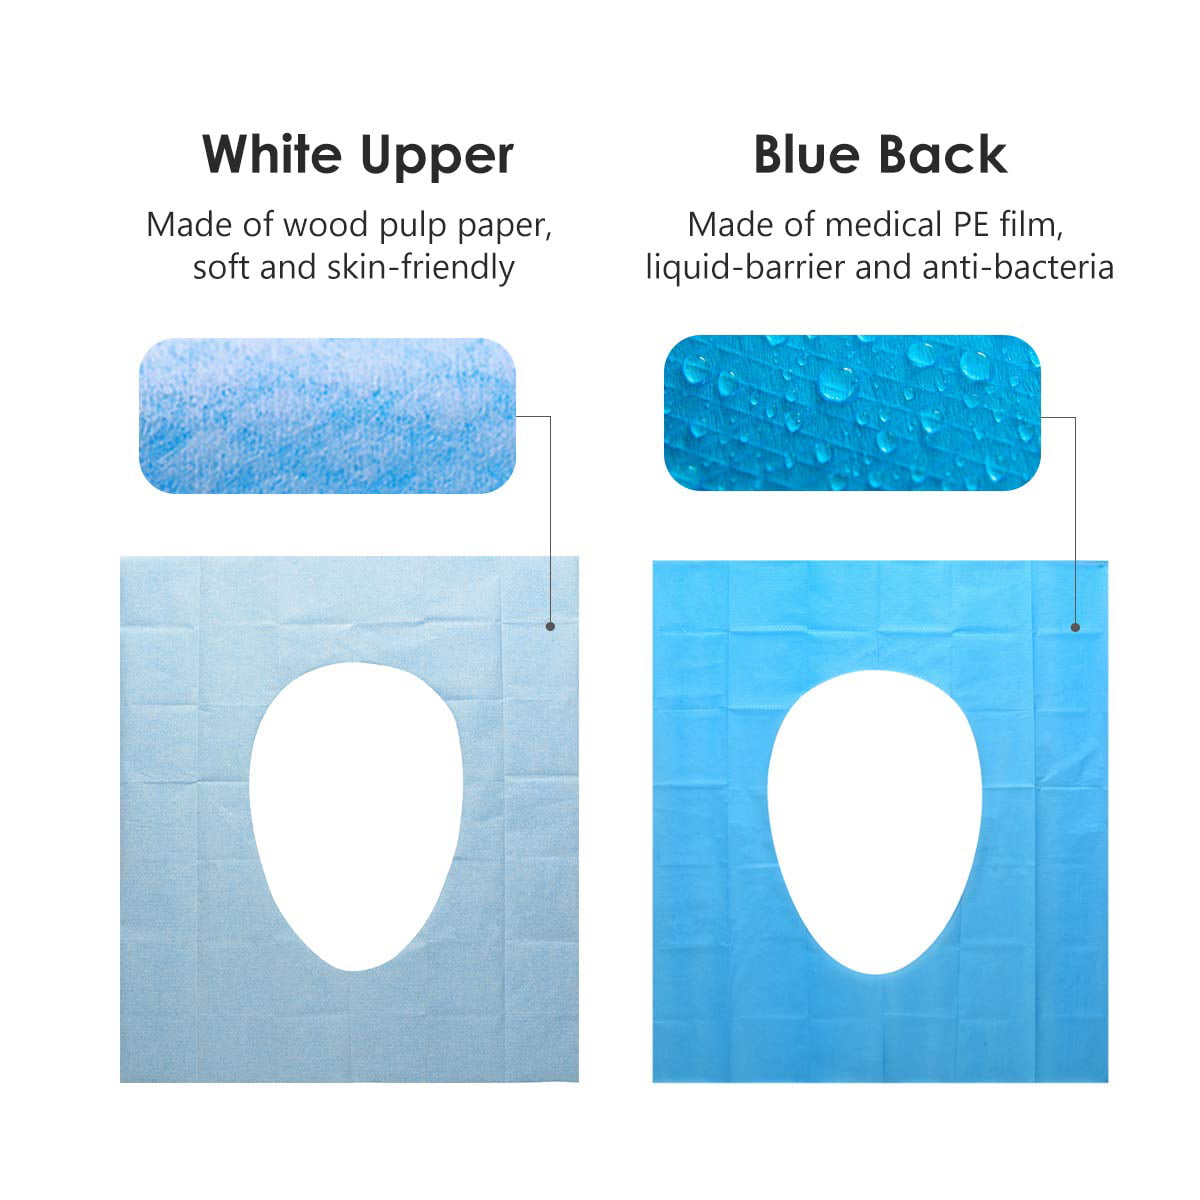 30 Pcs Travel Disposable Toilet Seat Cover,Waterproof Individually Wrapped Portable Travel Toilet Seat Covers,Portable Public Toilet Protector for Public Restrooms,Airplane,Camping,Cruise,Train Blue 